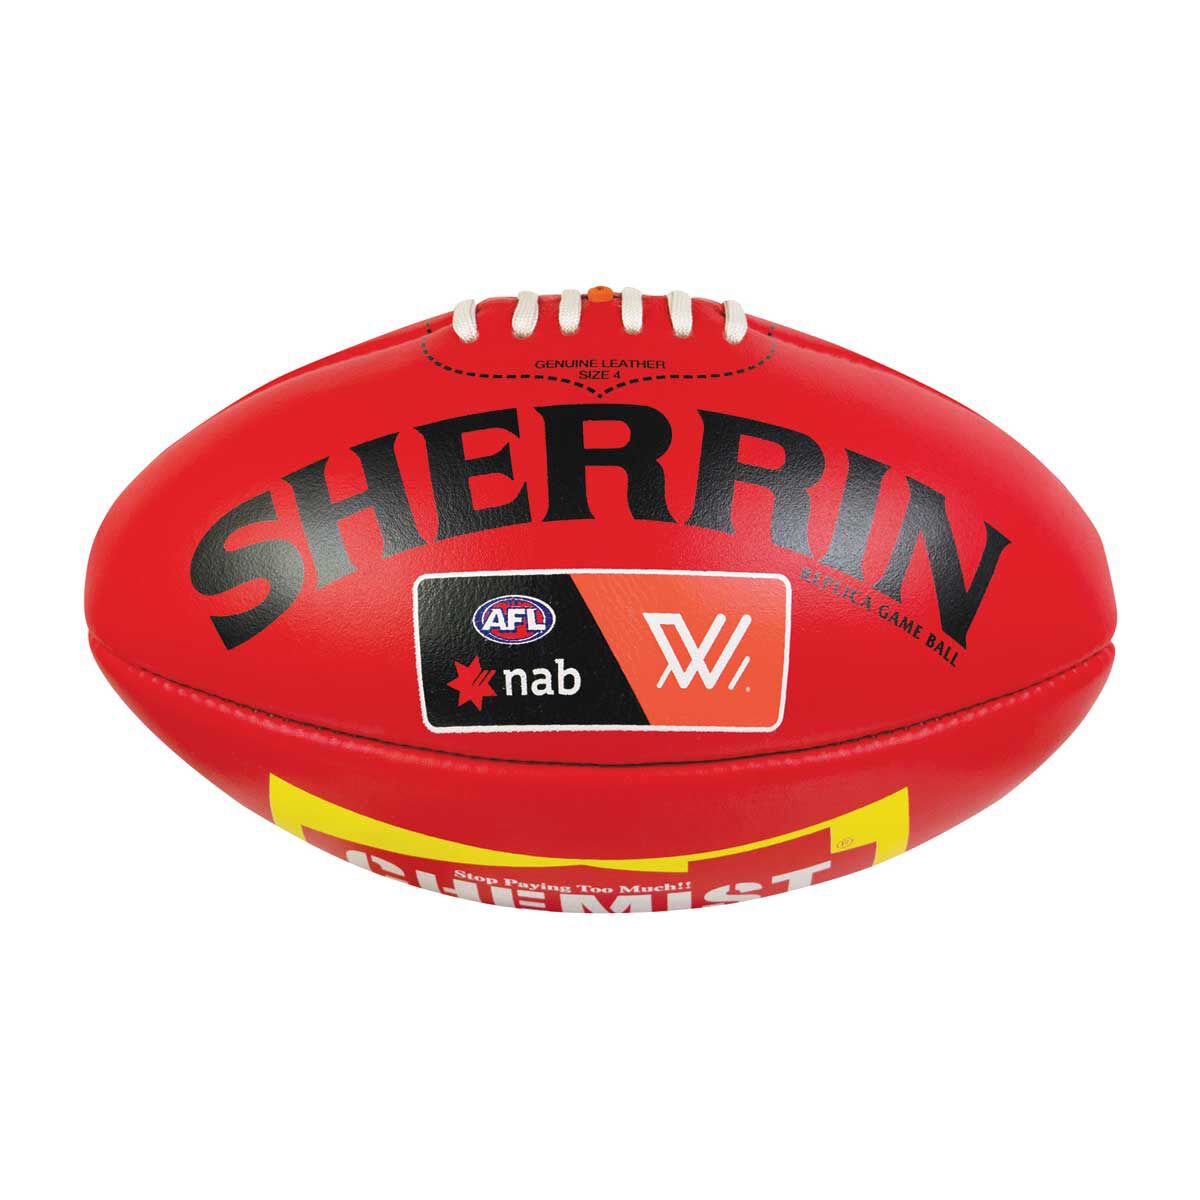 Sherrin Replica Size 5 Game Ball Red for sale online 